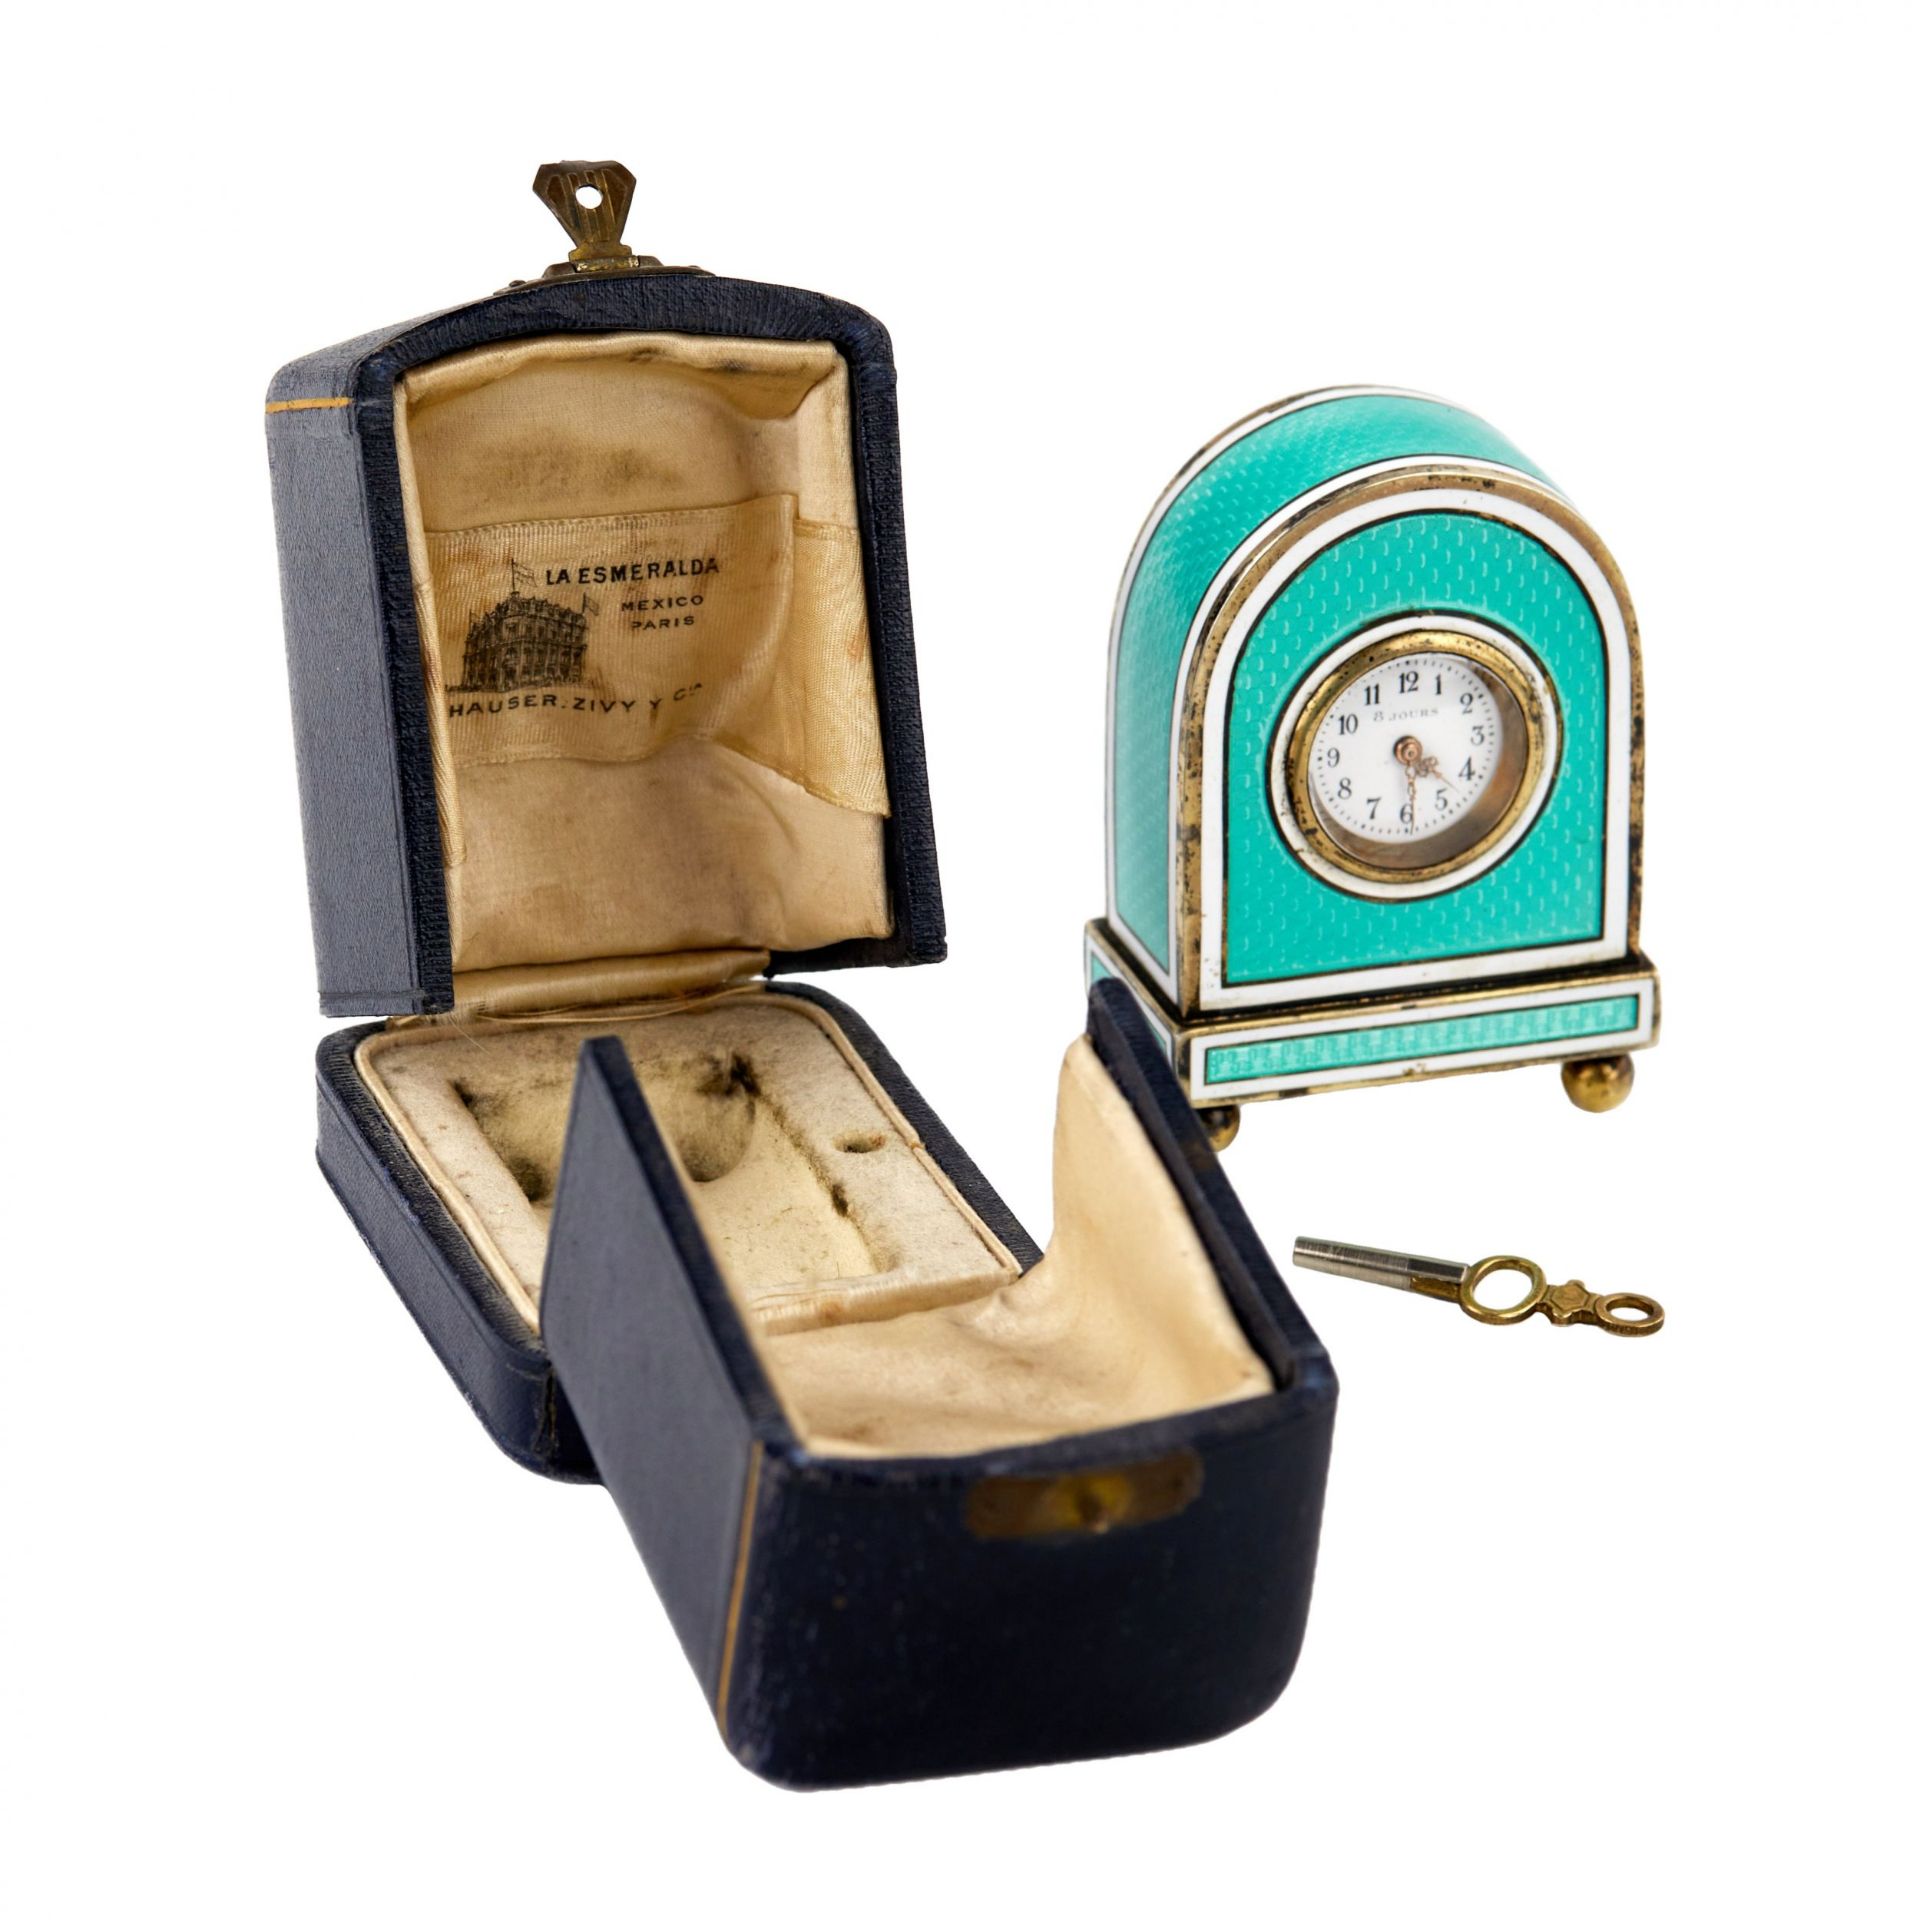 Miniature travel clock in guilloche enamel on silver, in its own case. - Image 6 of 10